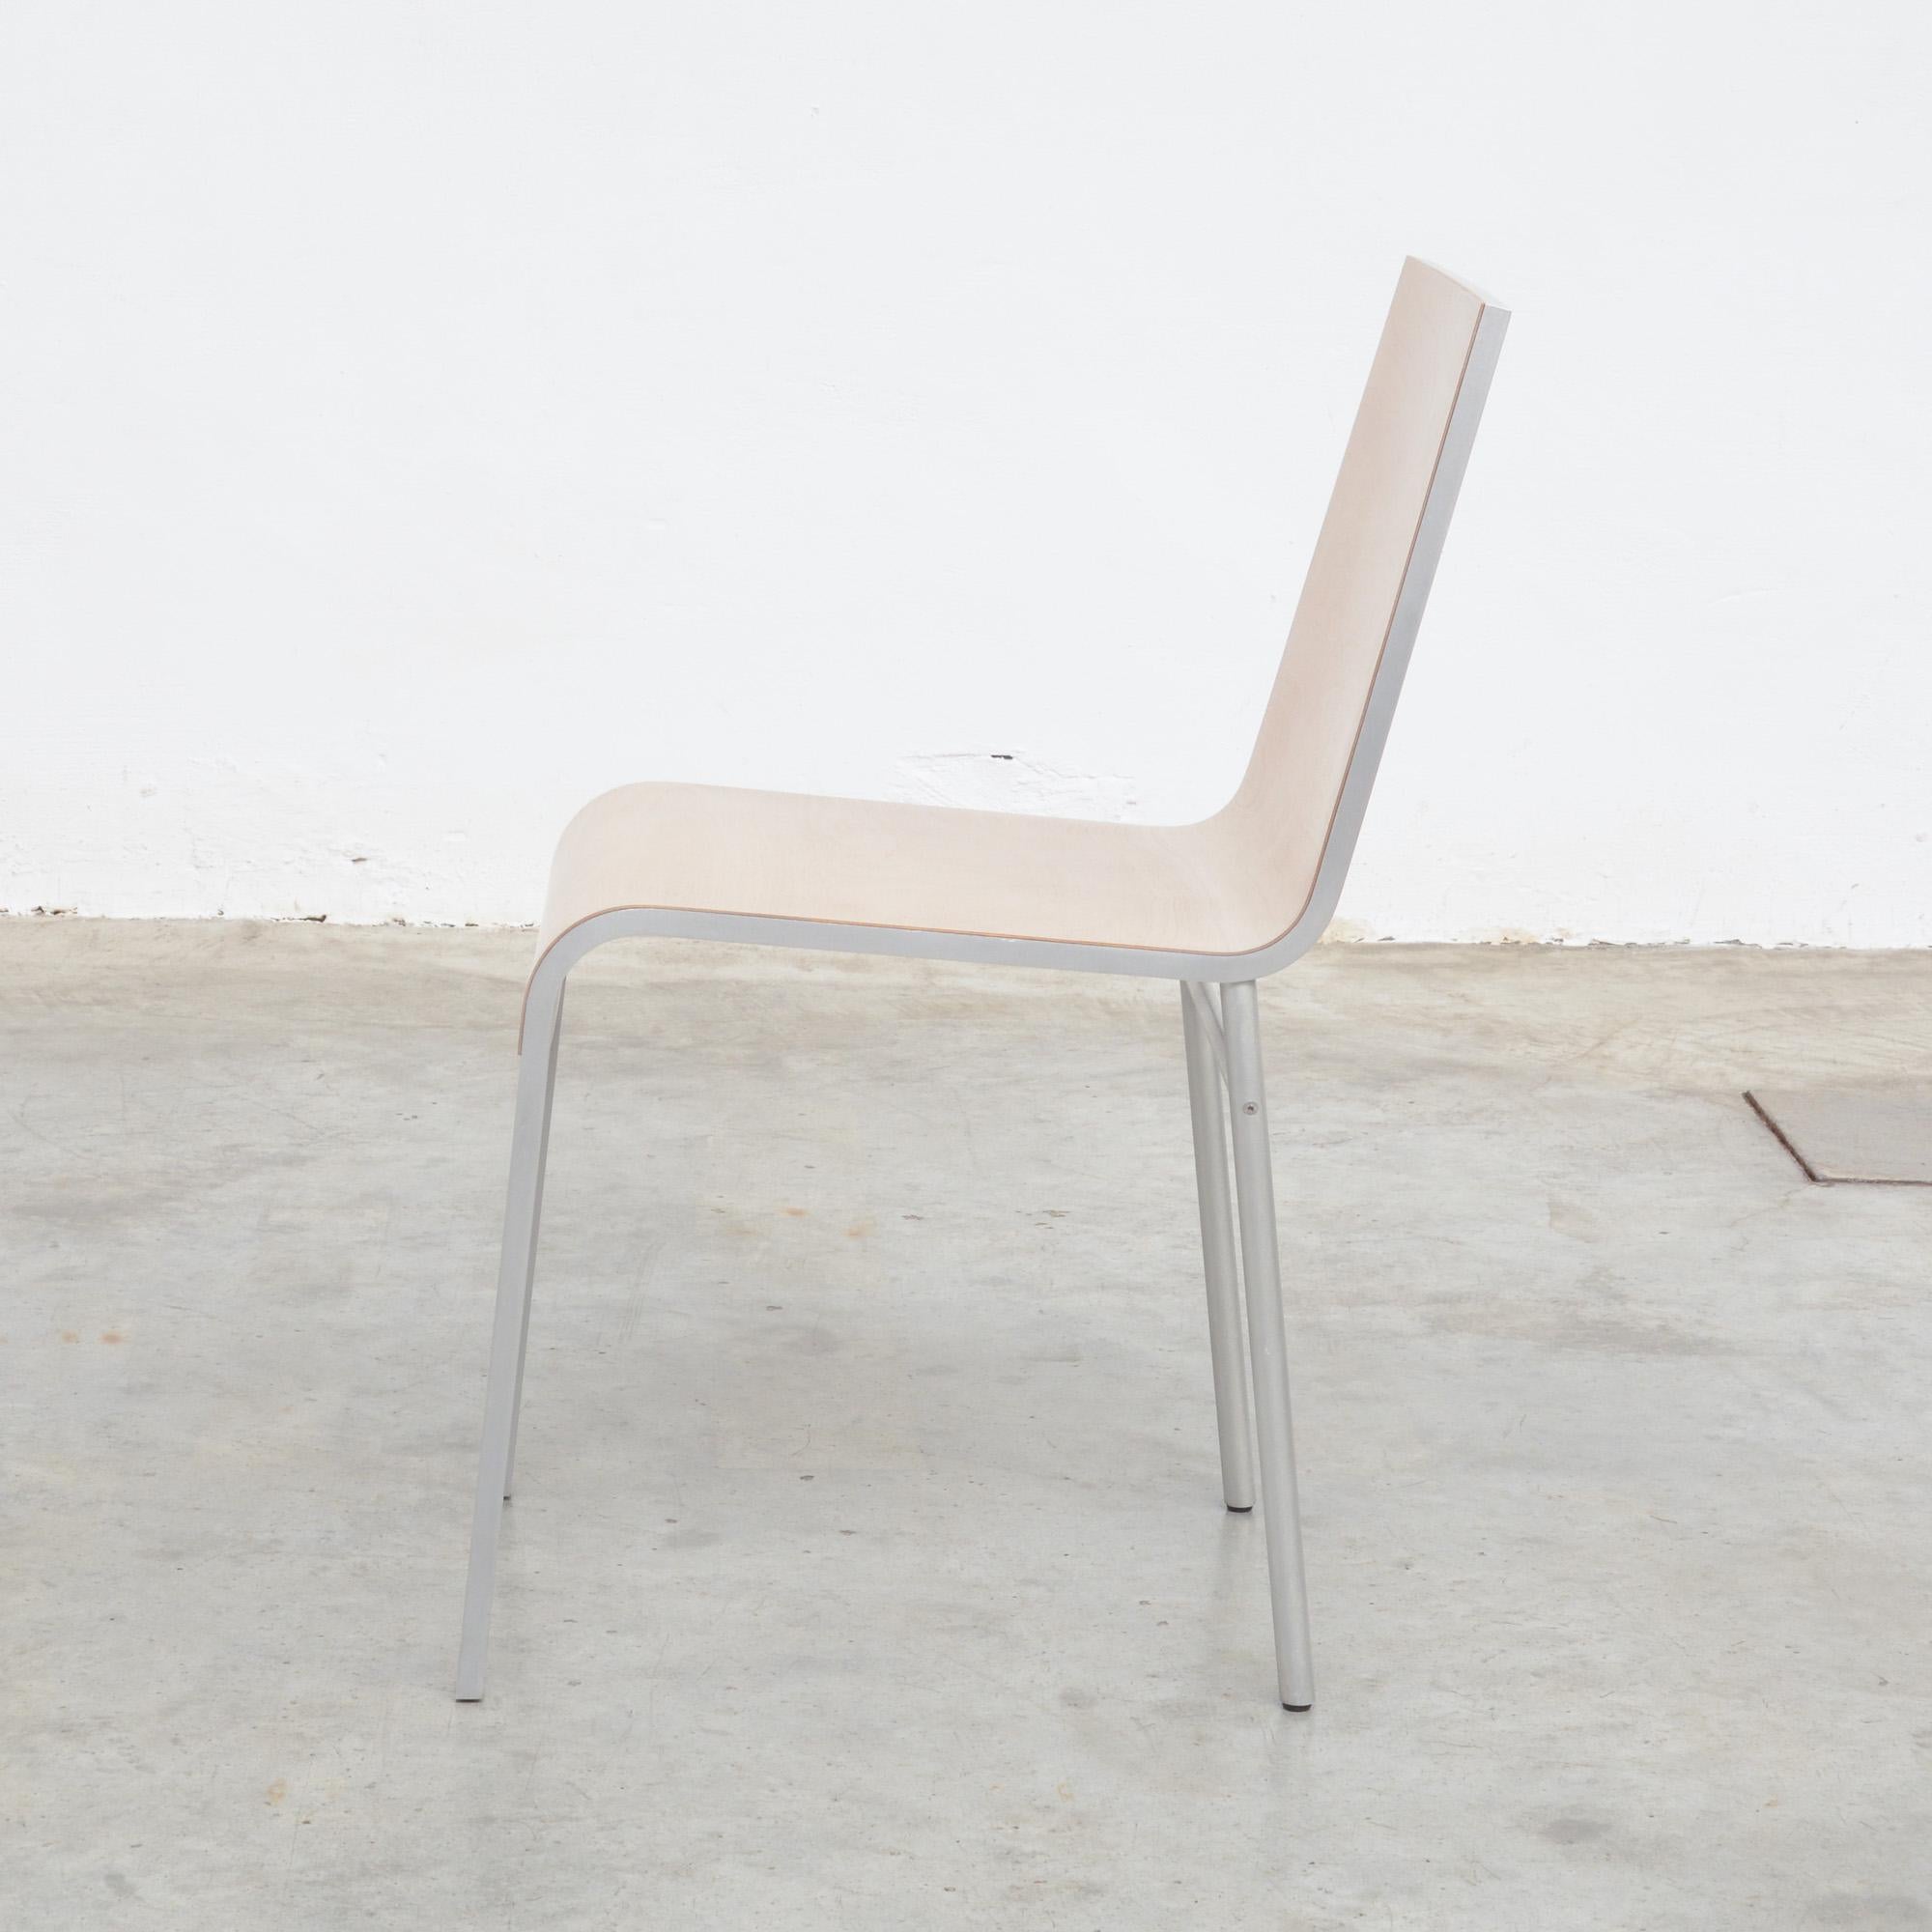 This Chair CN° II was designed by Maarten Van Severen in 1992. It is a 1st production, produced in his own workshop in Gent.
The frame is made of aluminum and the back and the seat are made of beech plywood, varnished on request of the client. This